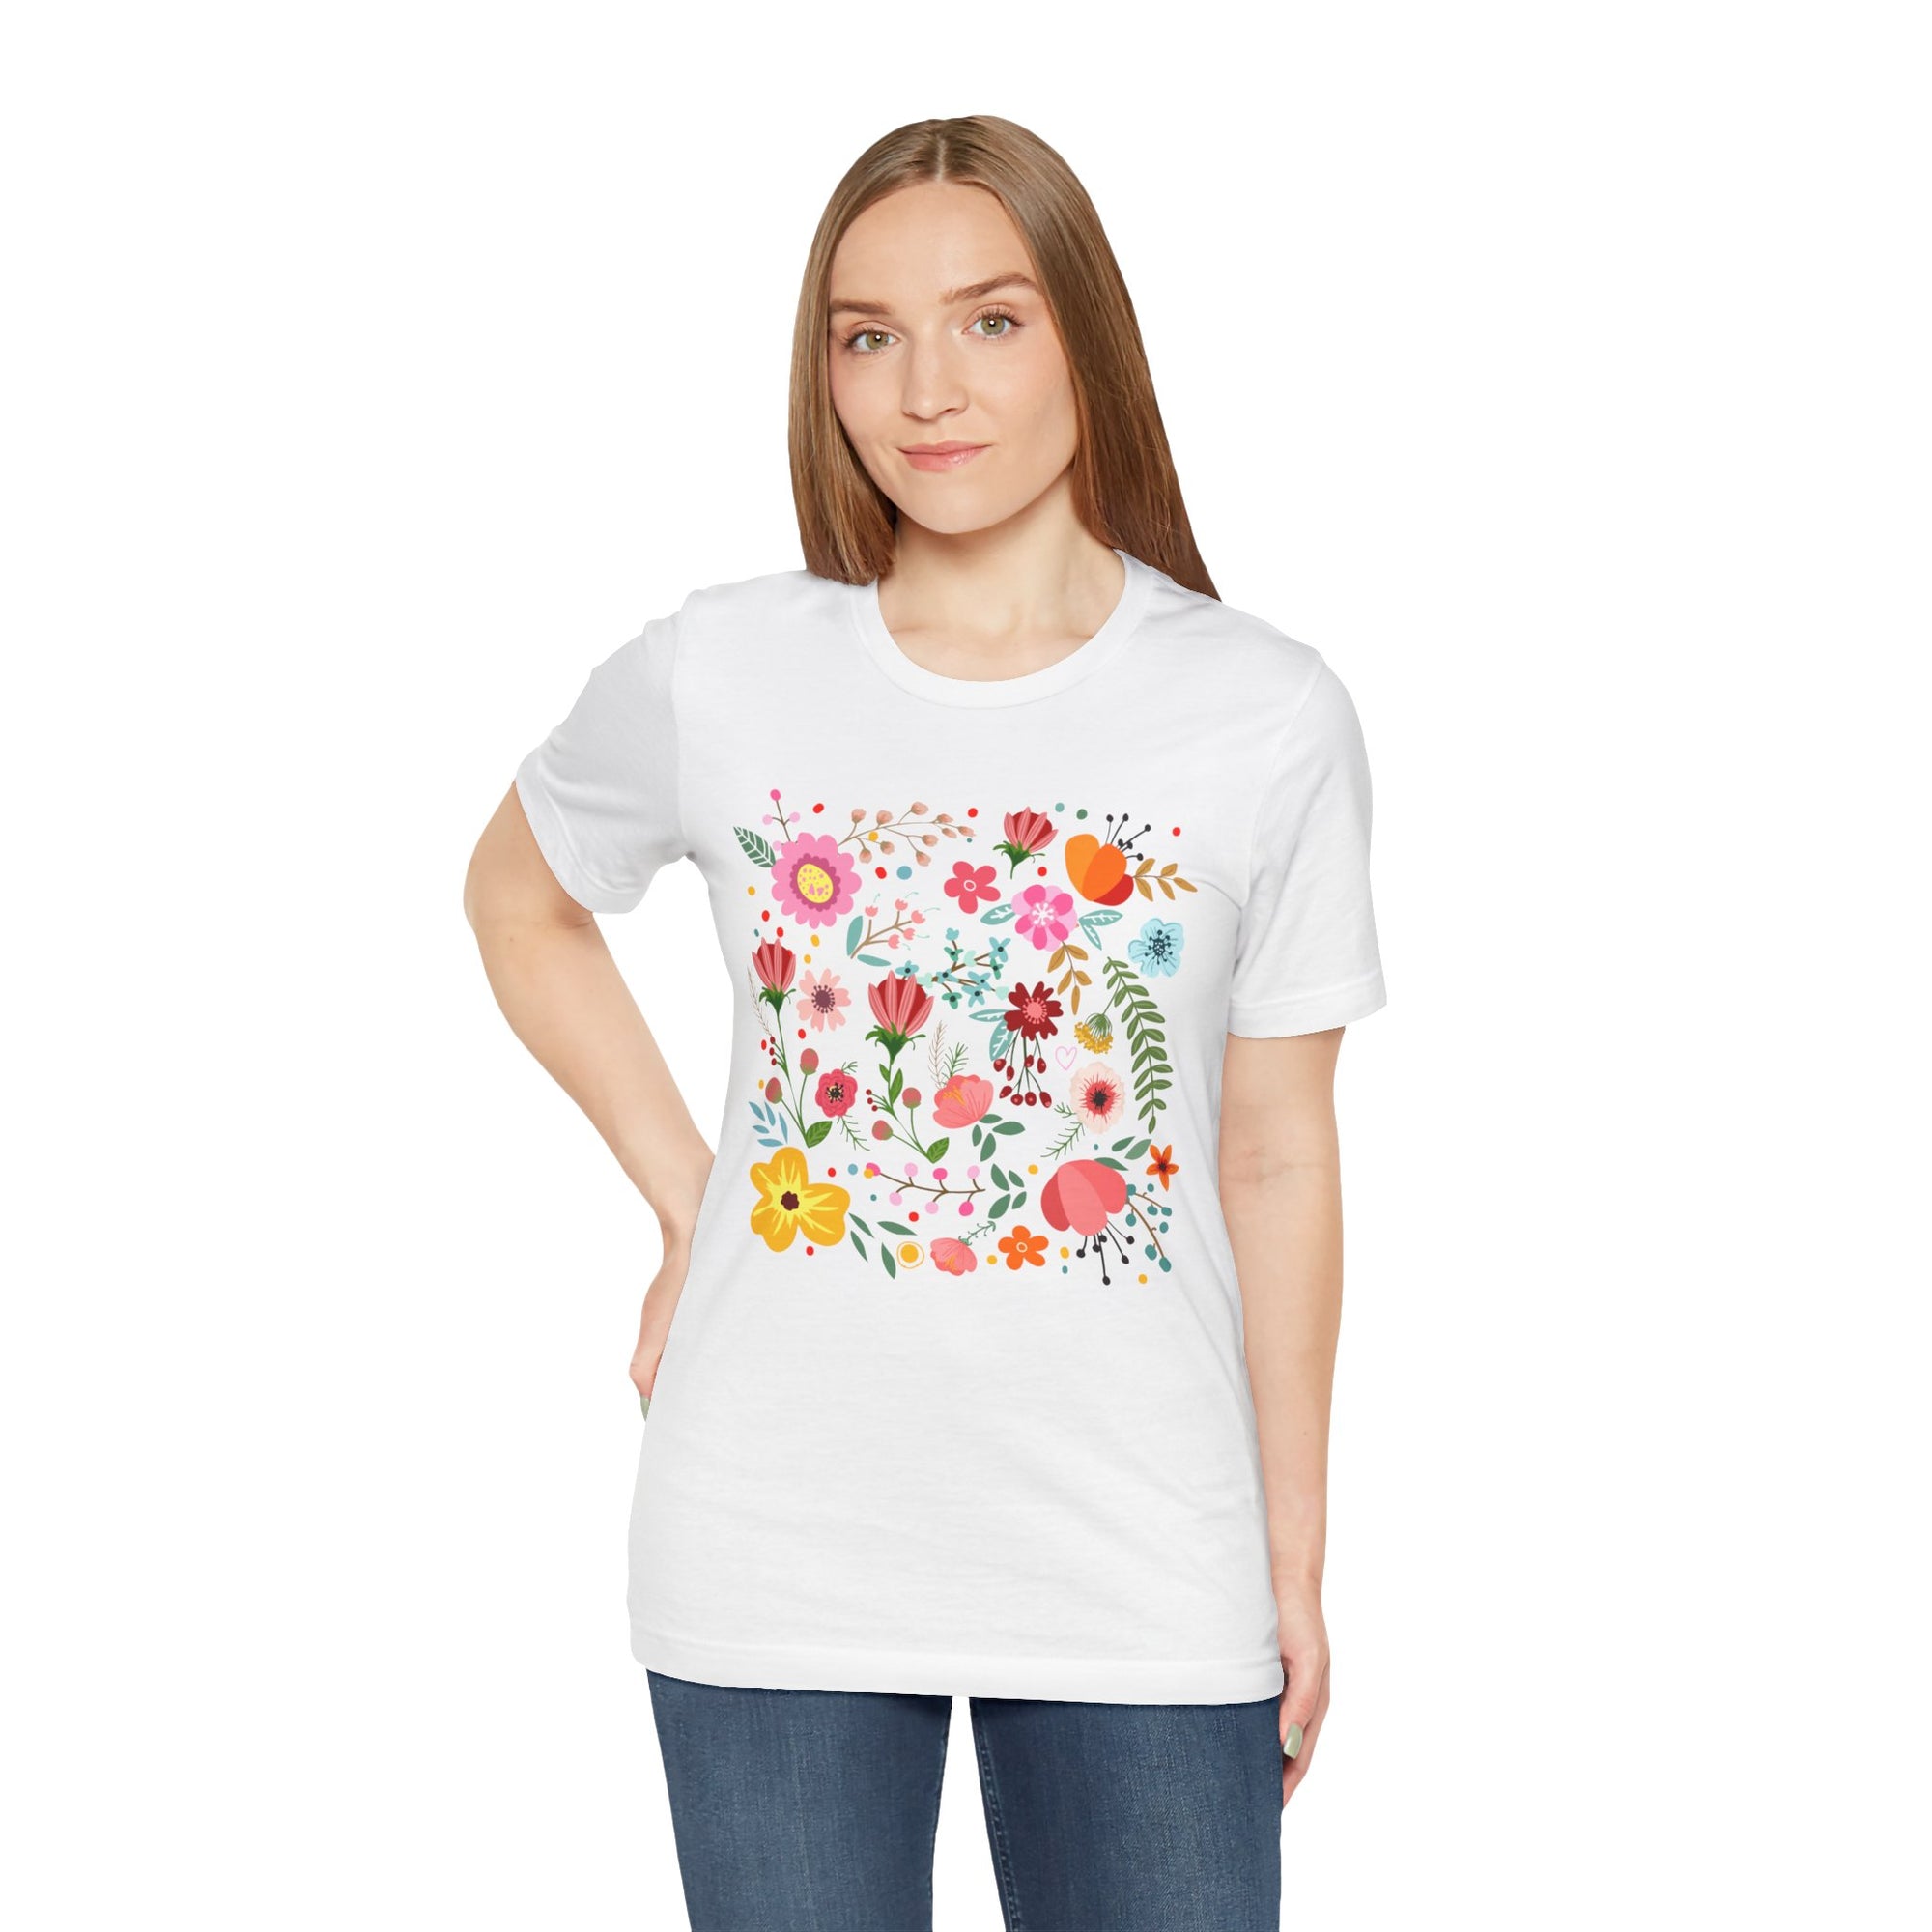 T Shirt Printed Colorful Flowers